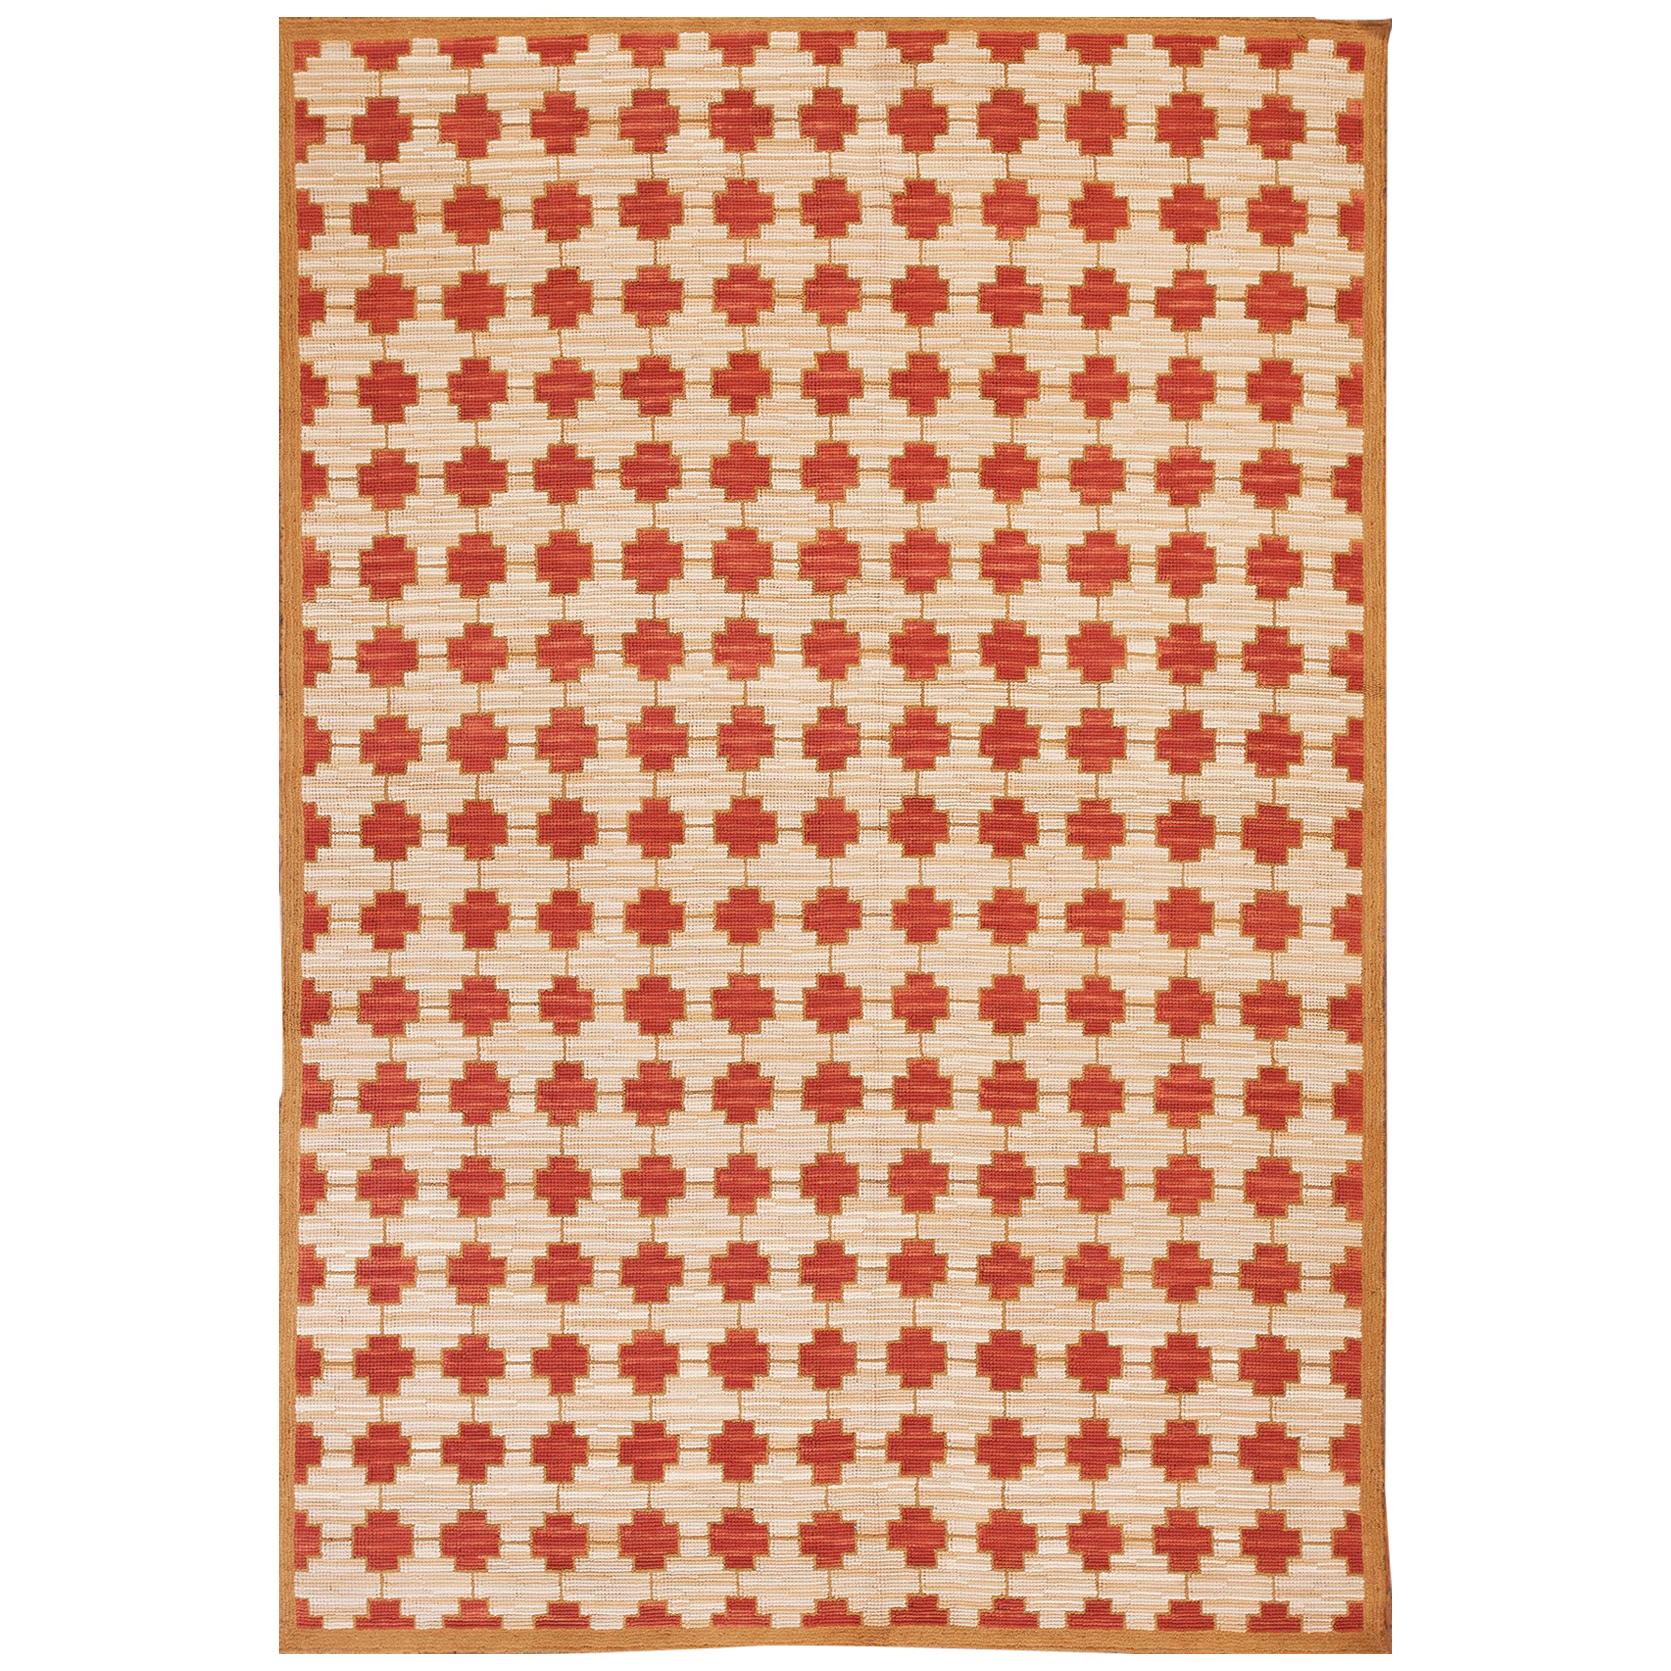 Contemporary Handwoven Cotton Hooked Rug ( 6' X 9' - 185 x 275 )  For Sale